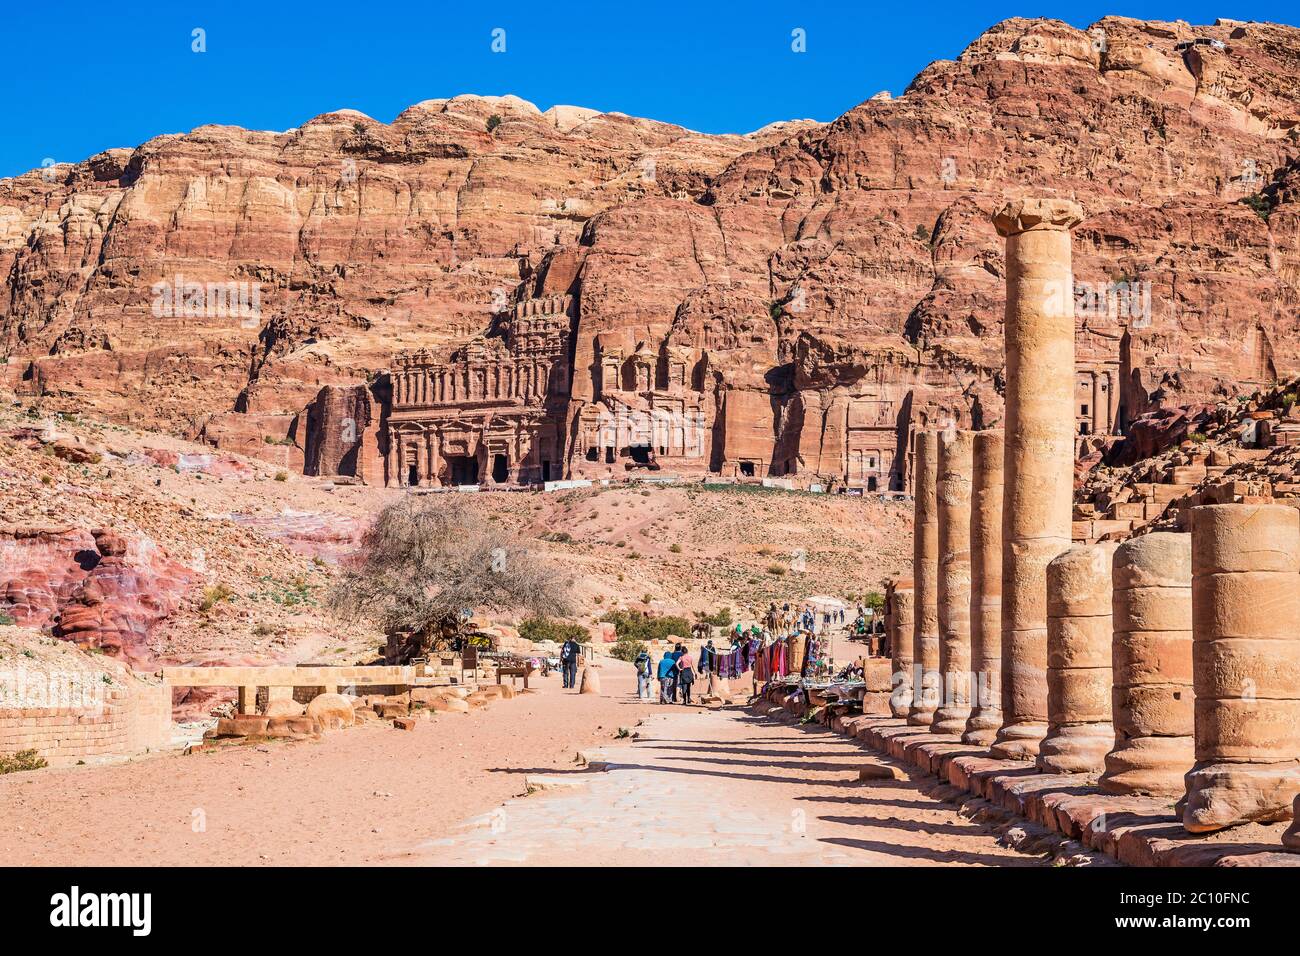 Petra, Jordan. The Royal Tombs and columns of the Great Temple at the ancient capital of the Nabatean Kingdom. Stock Photo